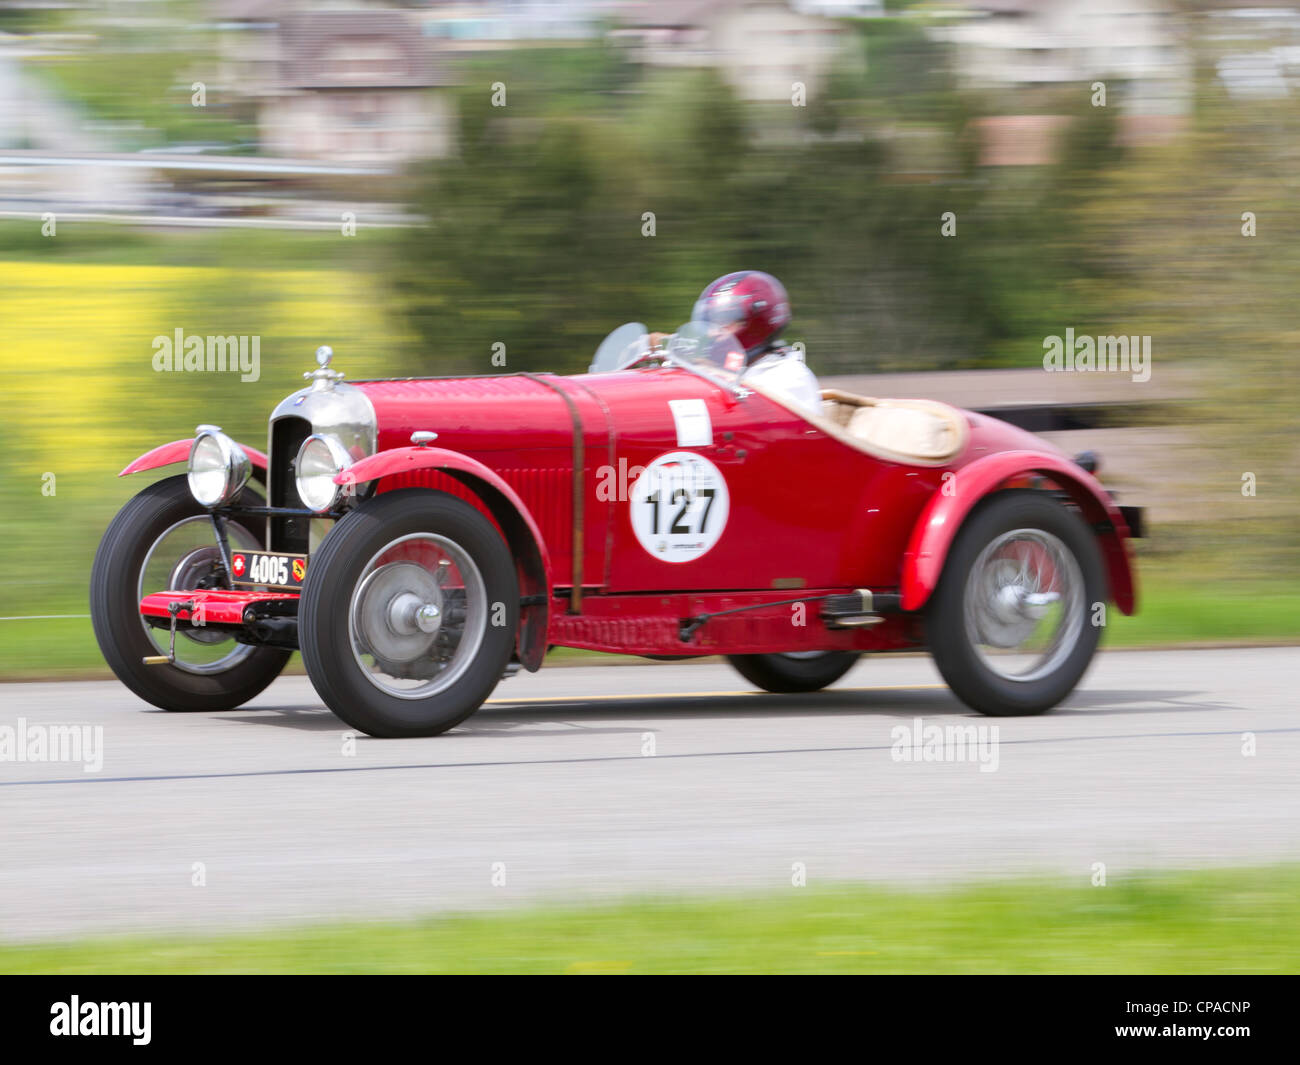 Vintage pre war race car Amilcar CG SS from 1926 at Grand Prix in Mutschellen, SUI on April 29, 2012. Stock Photo